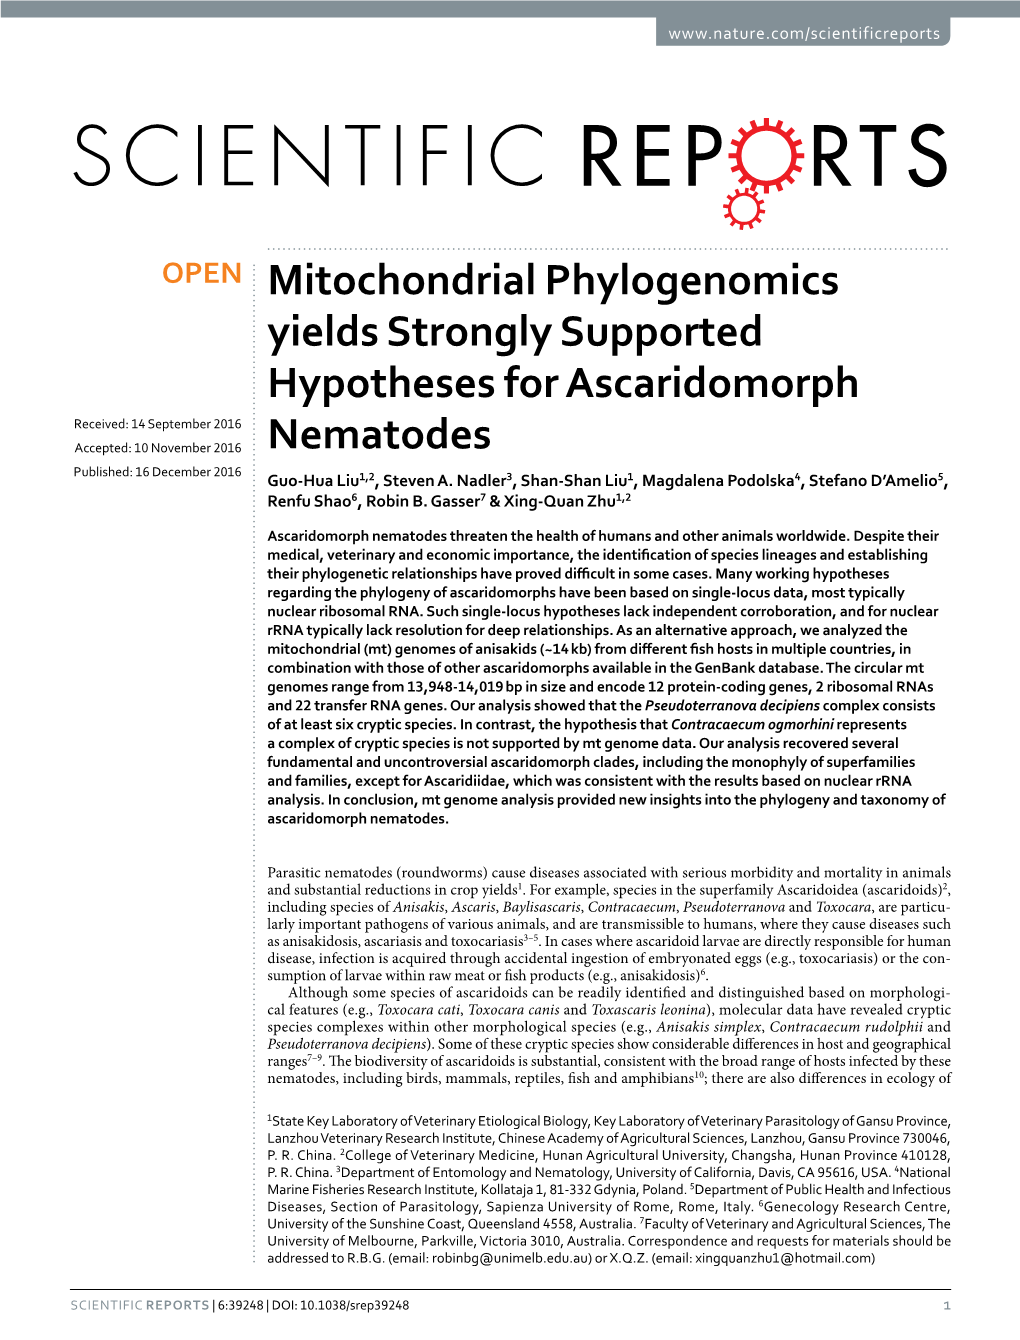 Mitochondrial Phylogenomics Yields Strongly